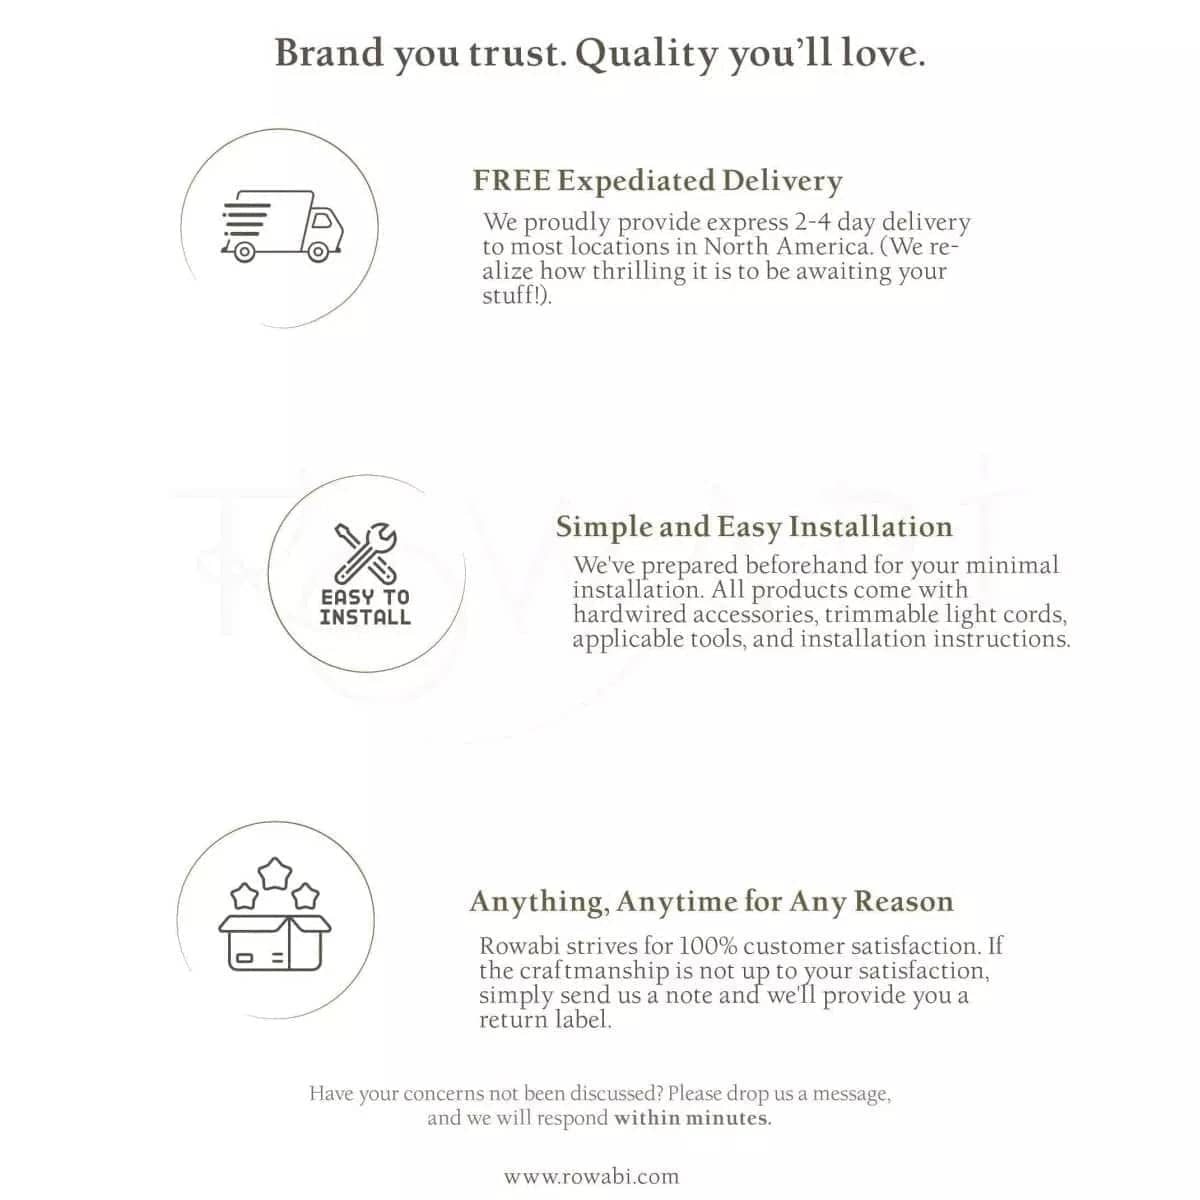 yara benefit brand you trust quality you will love